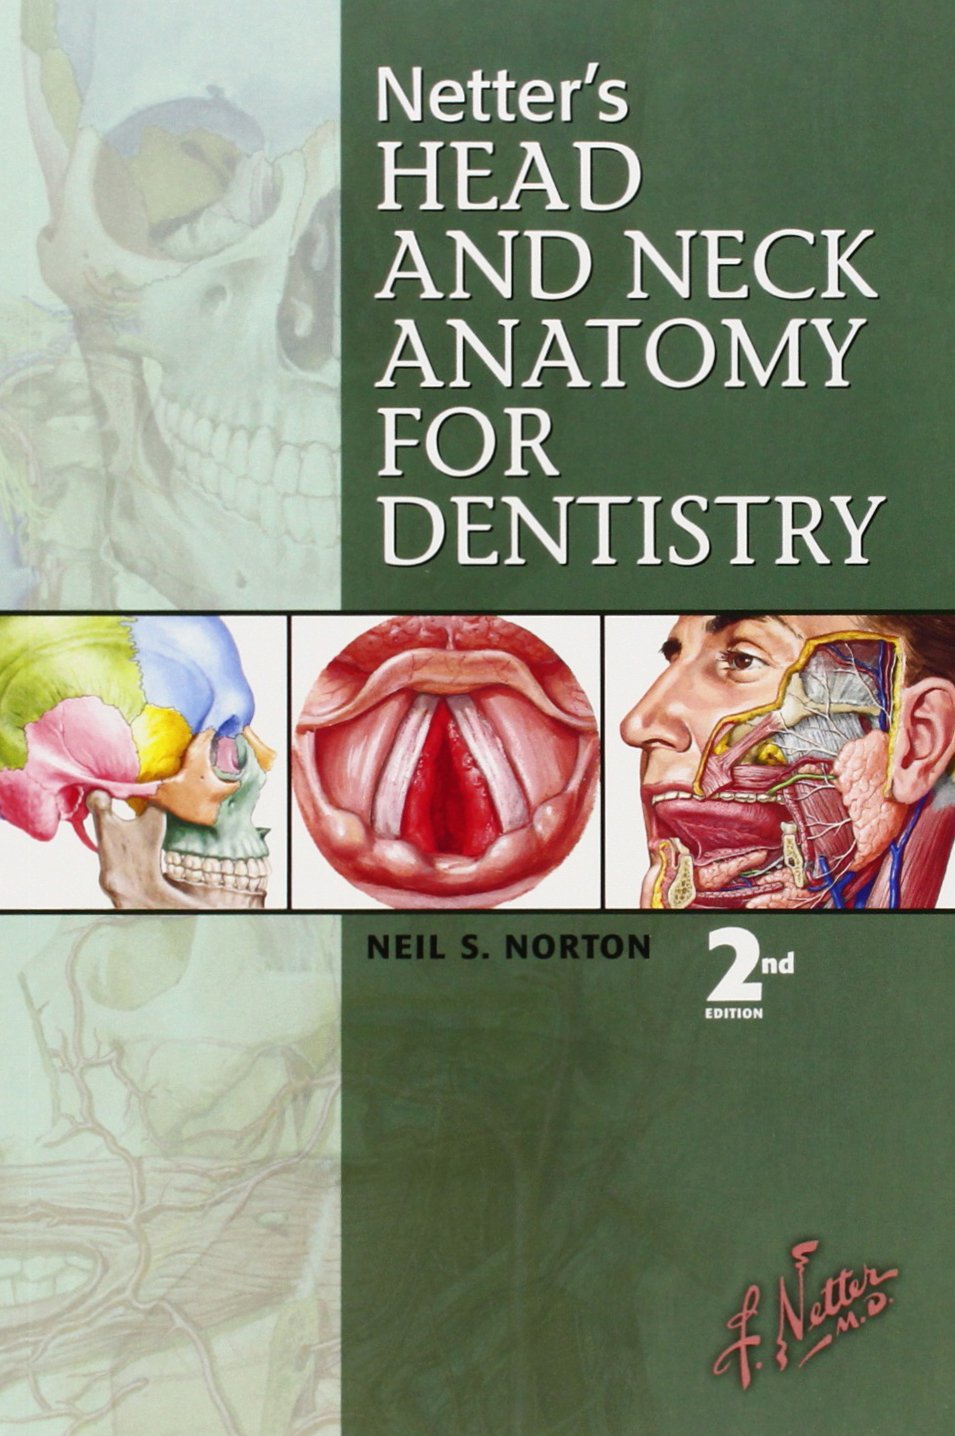 Netter's Head and Neck Anatomy for Dentistry 2nd Edition by Neil S. Norton (Author)